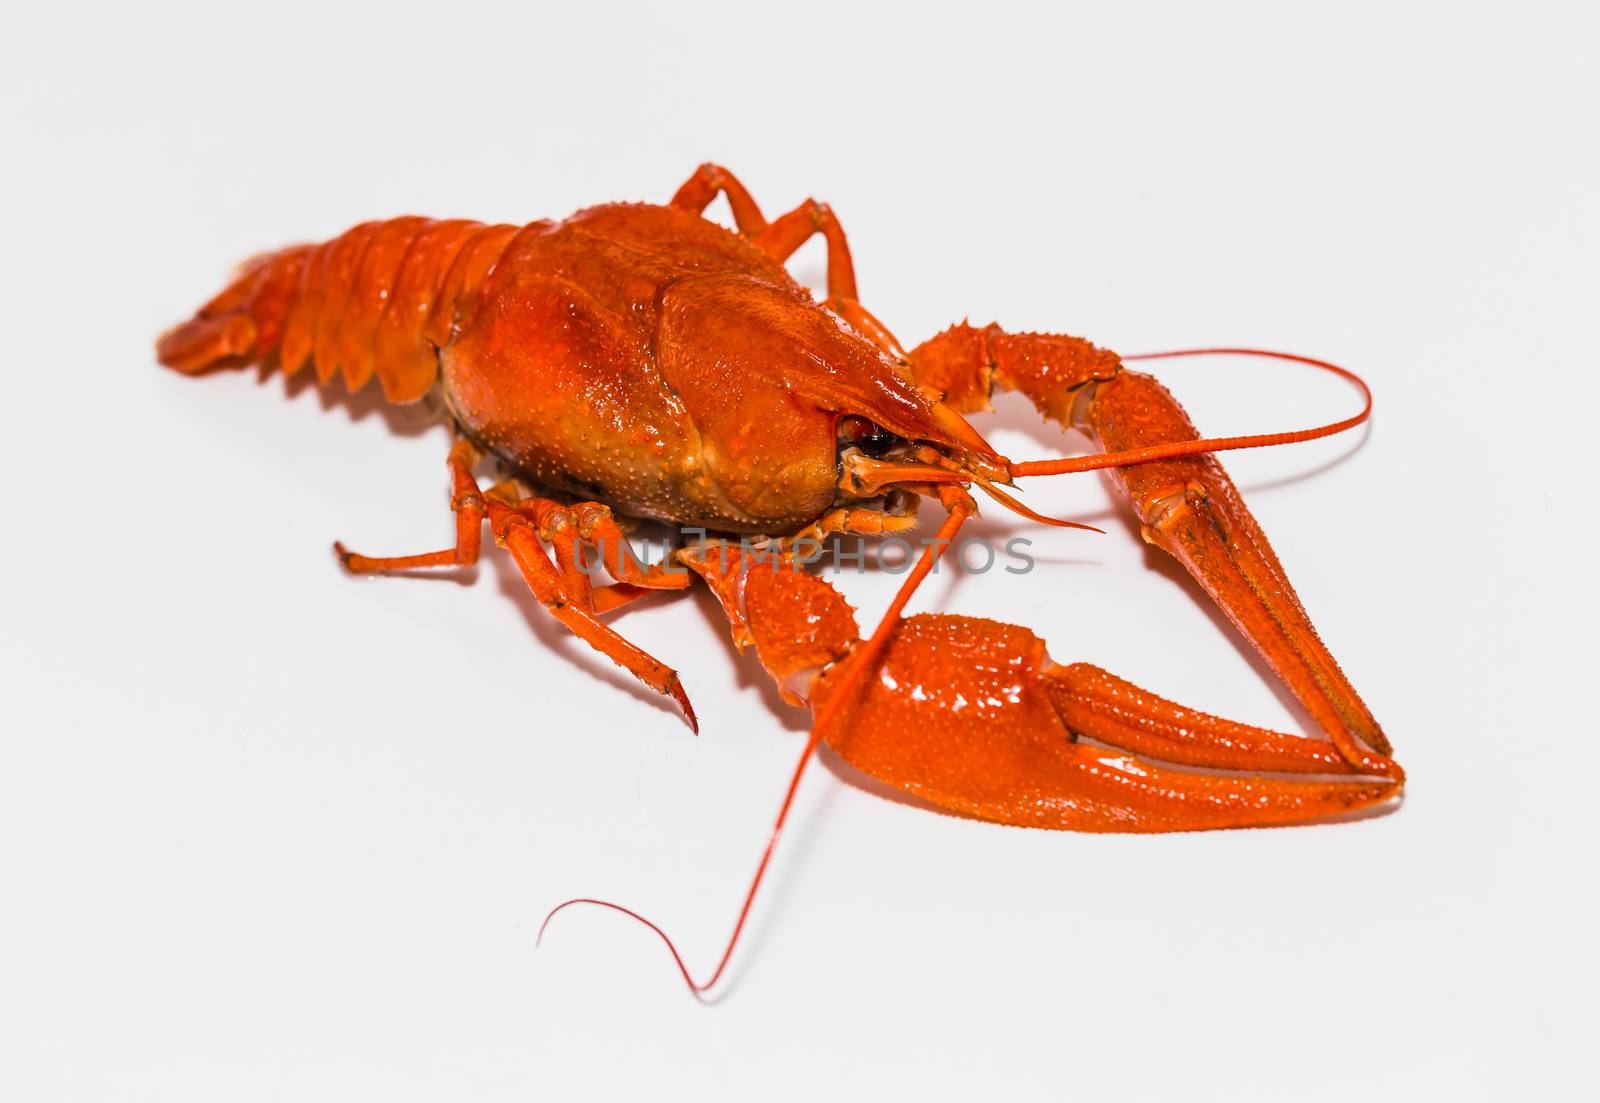 The Boiled crawfish on a white background